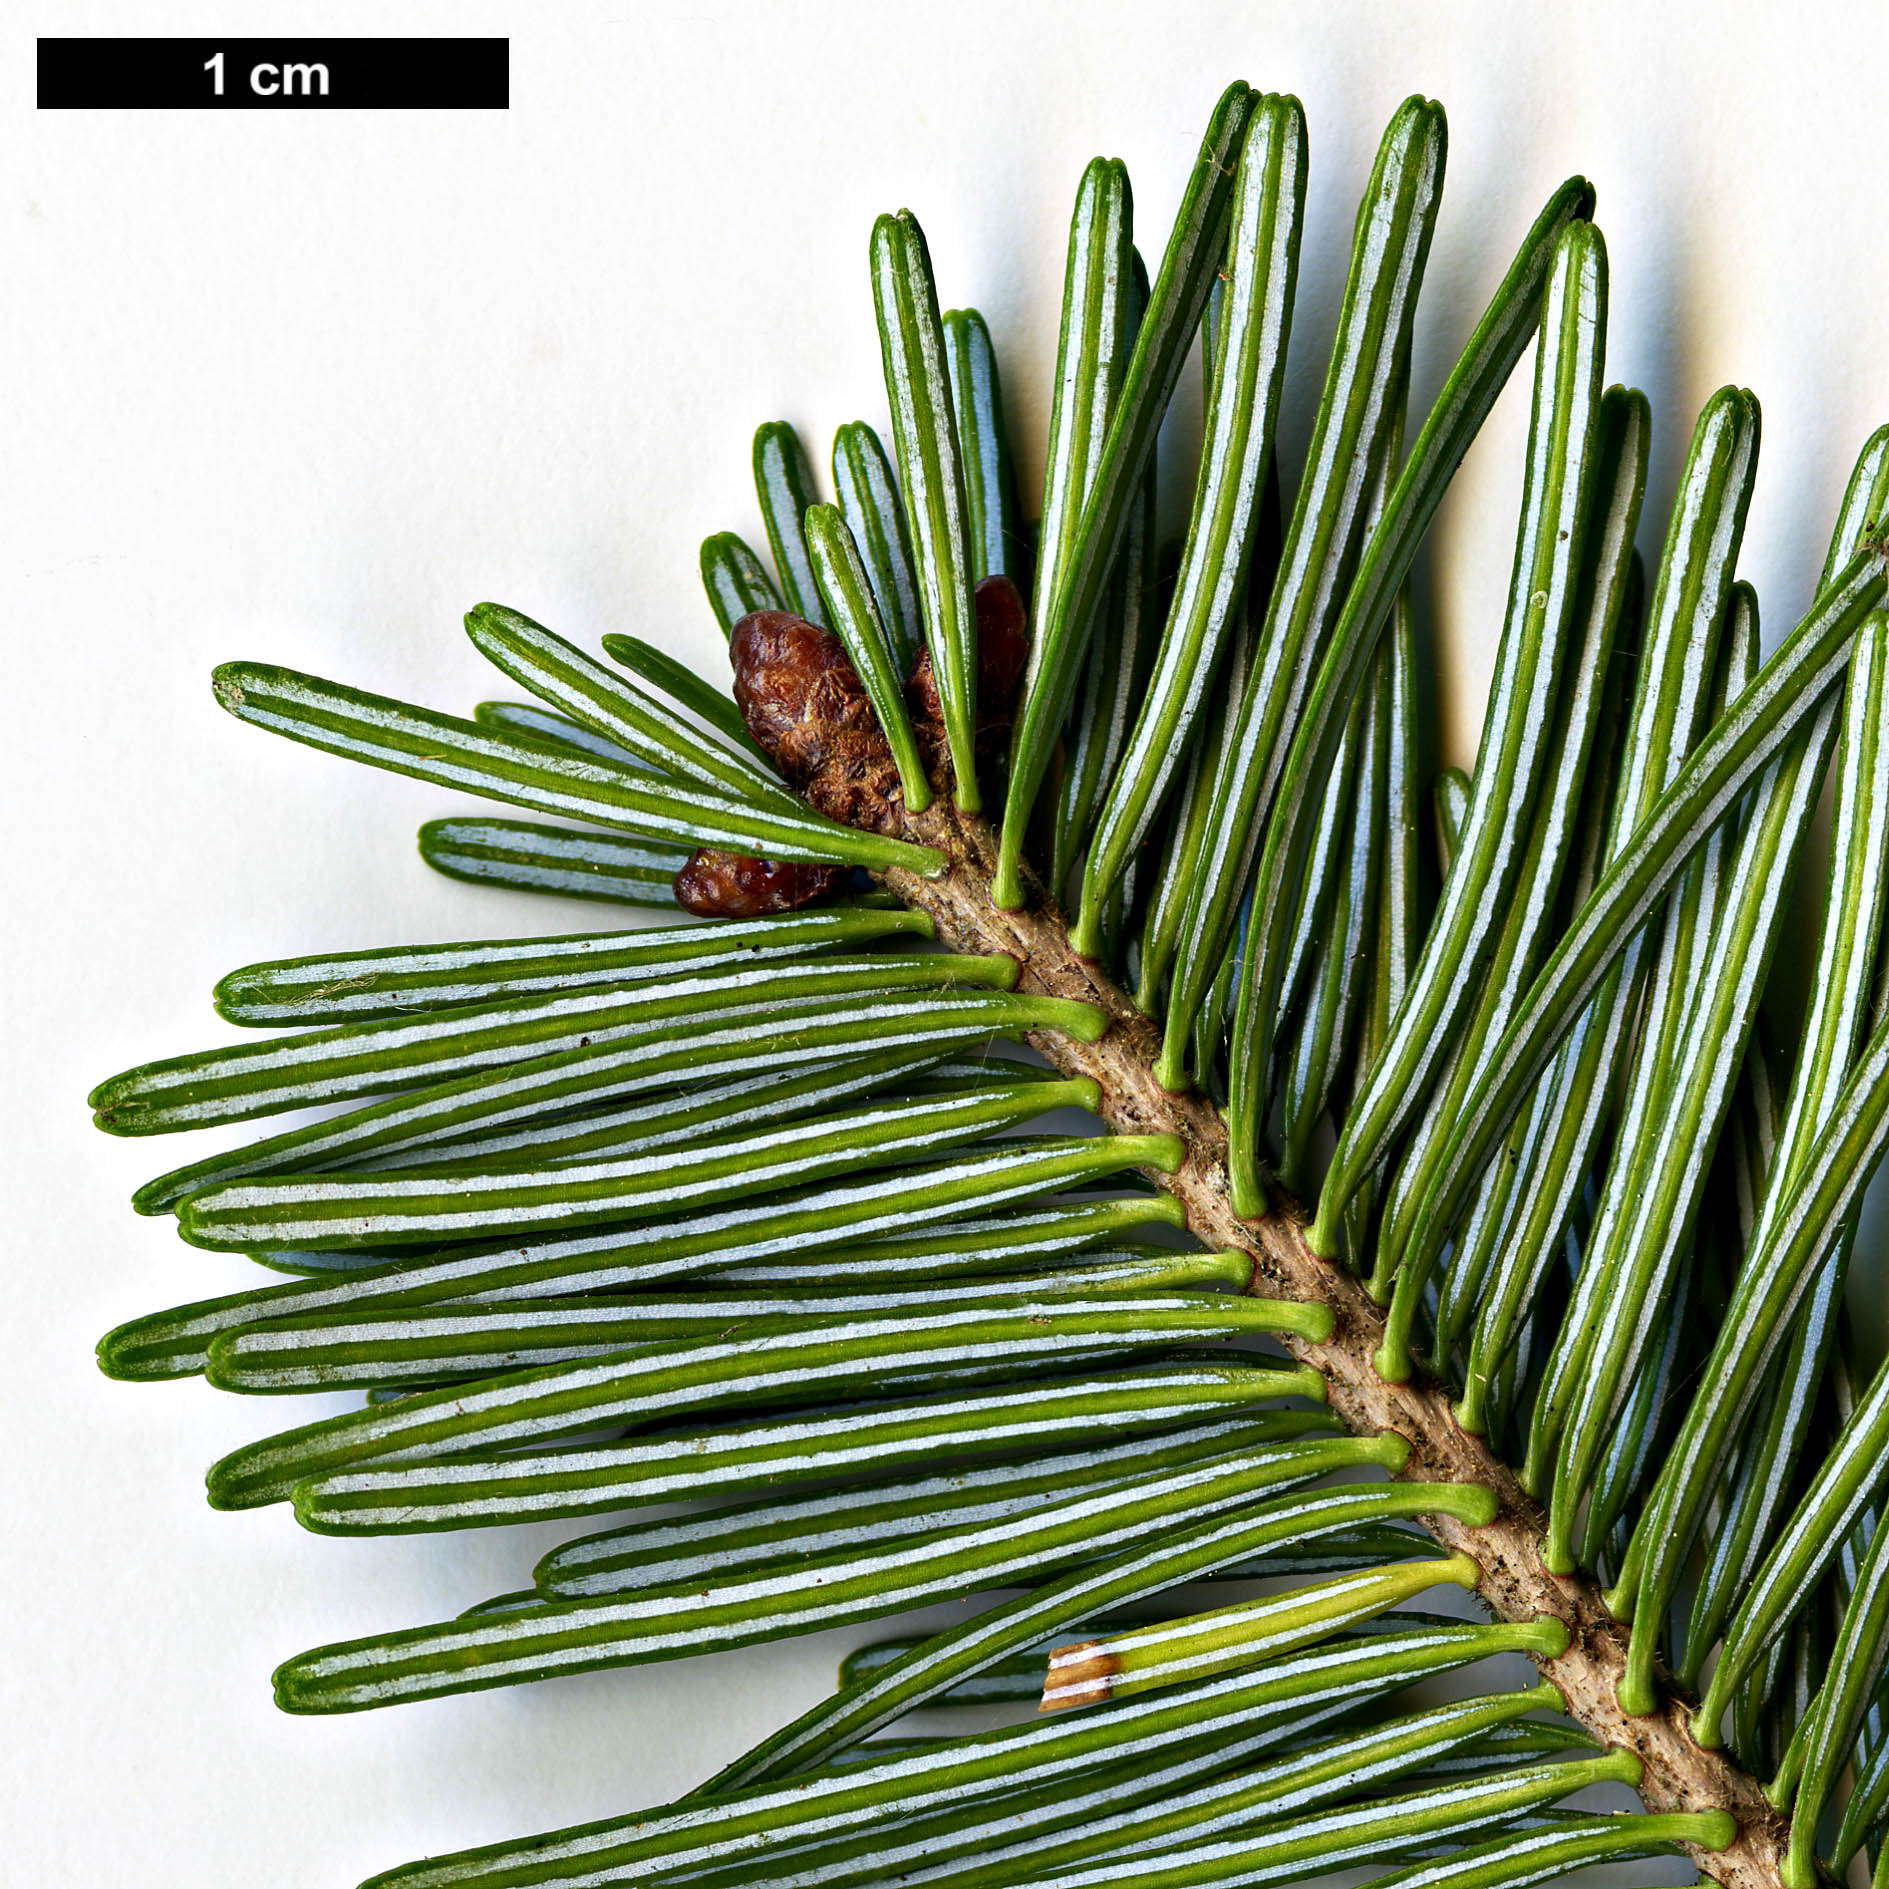 High resolution image: Family: Pinaceae - Genus: Abies - Taxon: nephrolepis